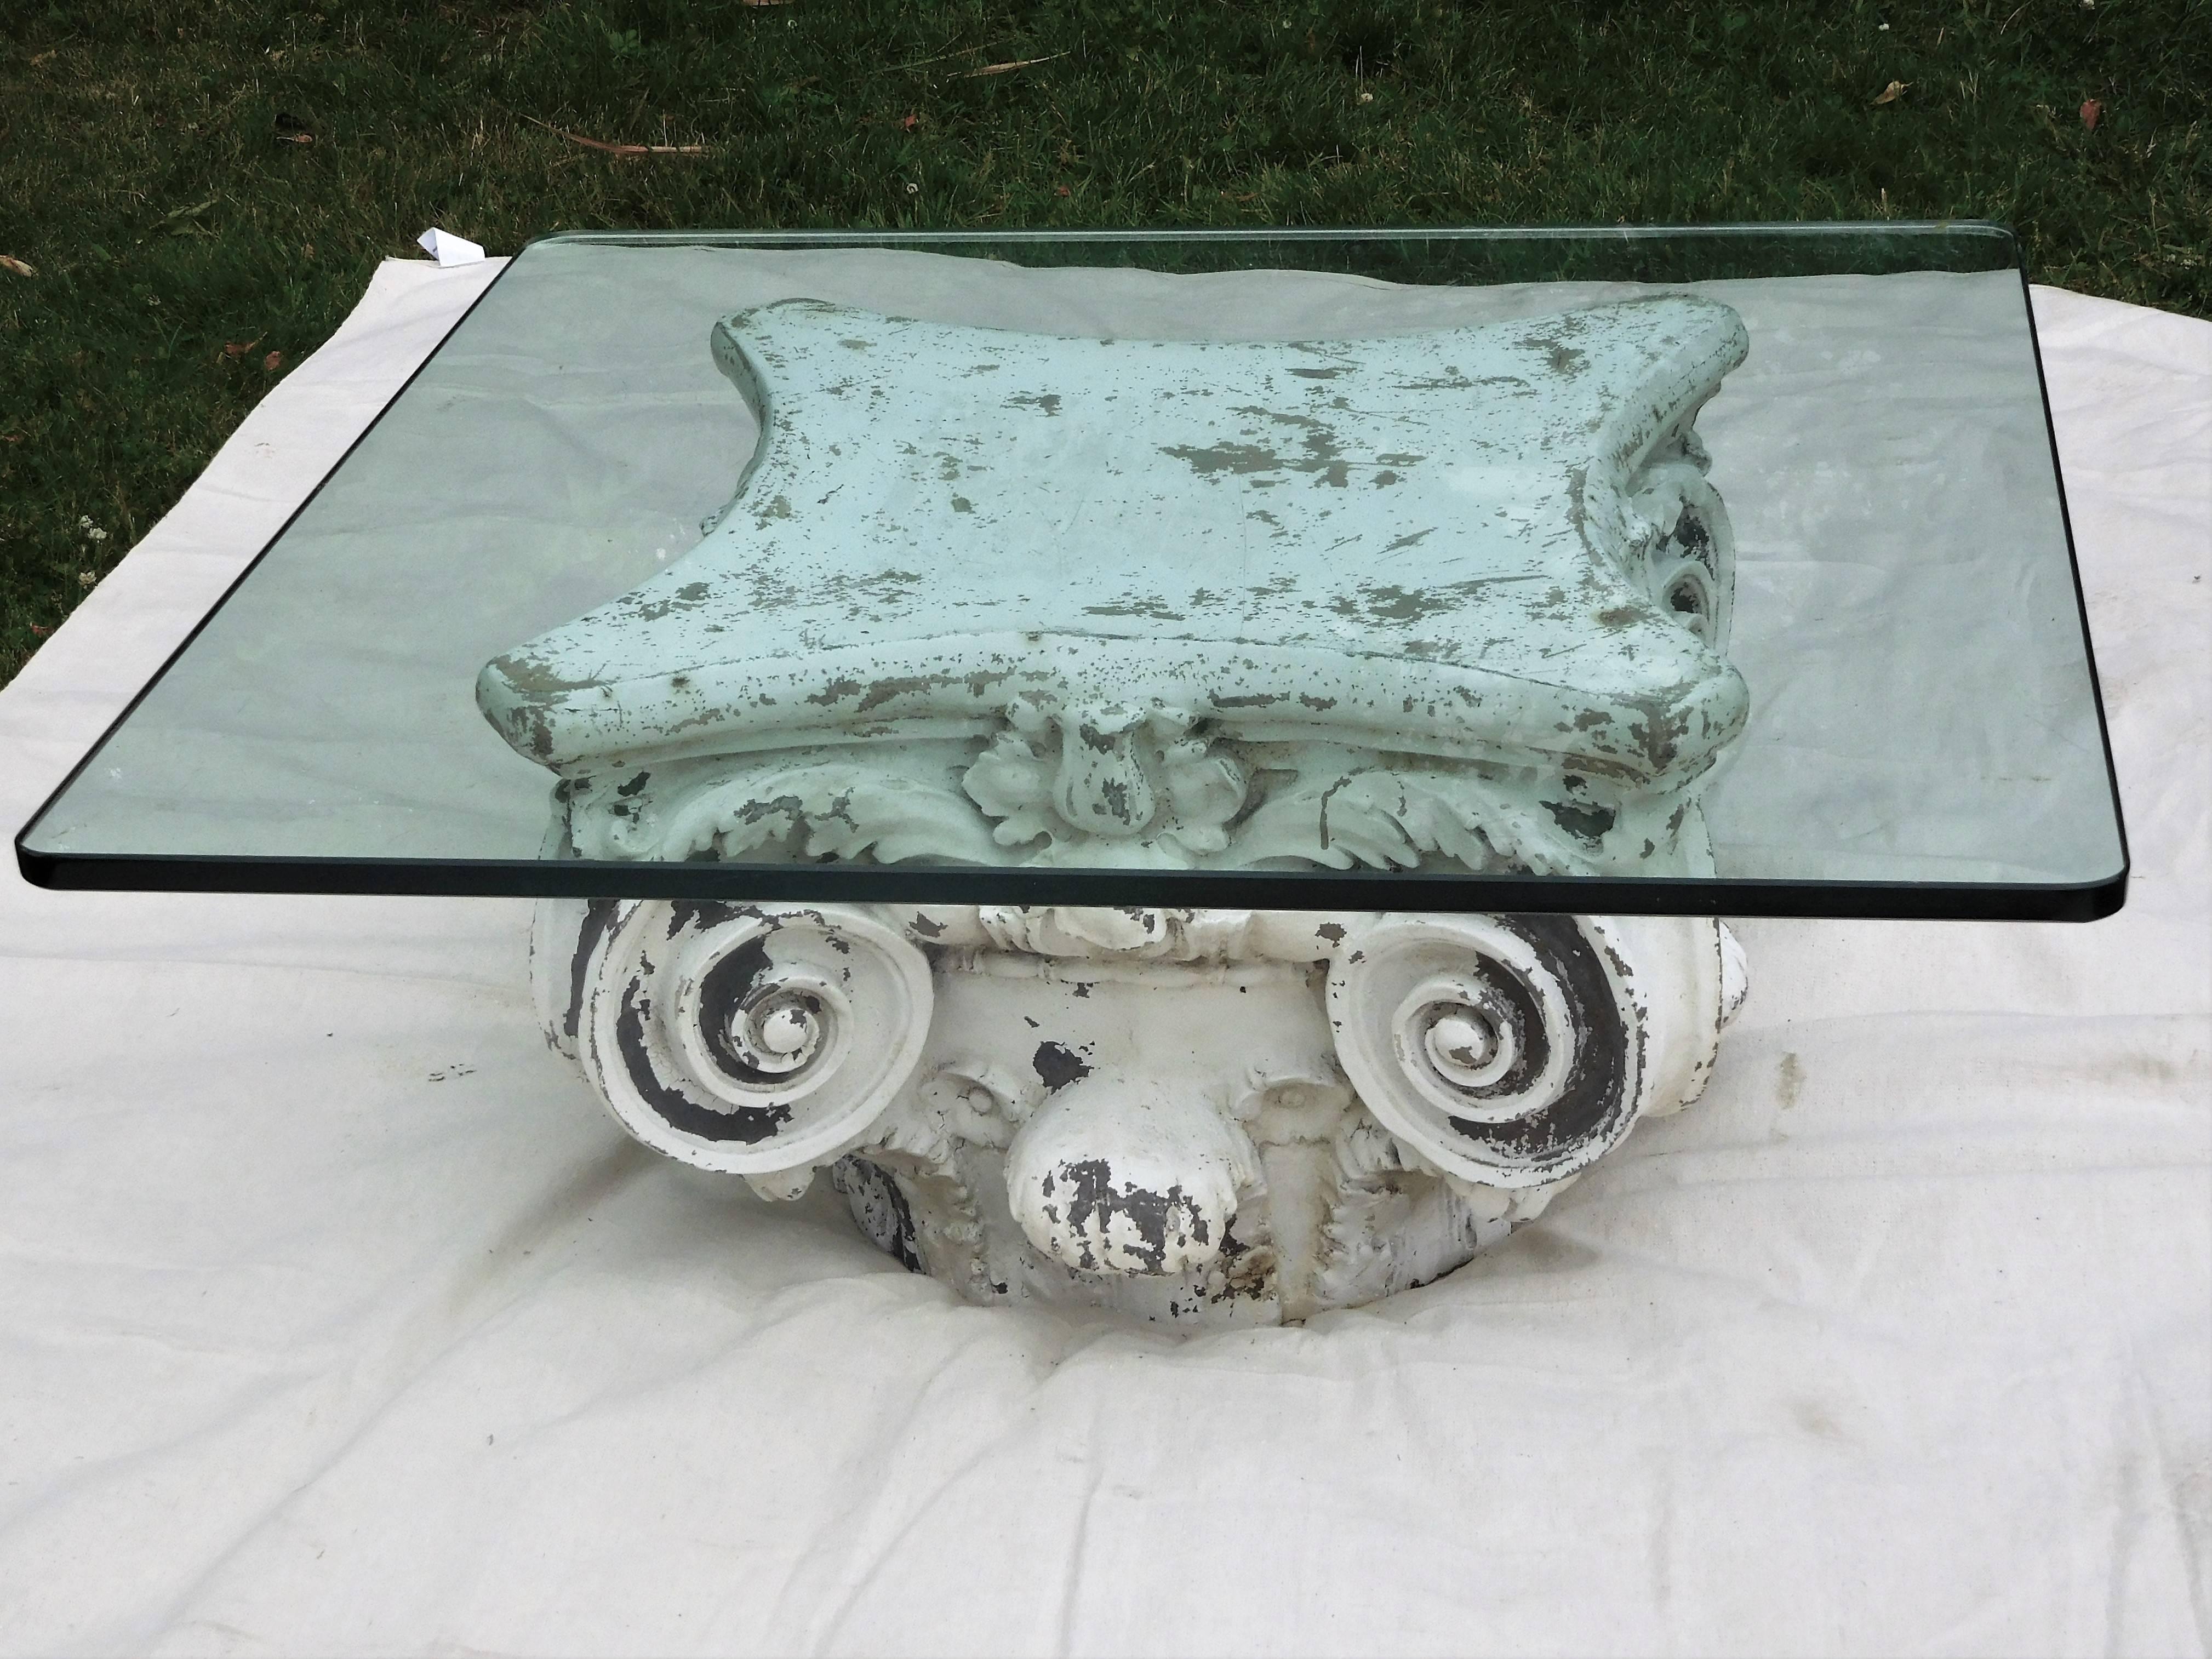 This clever low table is made of molded fiberglass and painted to look like the ruins of an ancient capital from a Corinthian/Ionic mix column. The base measures 24